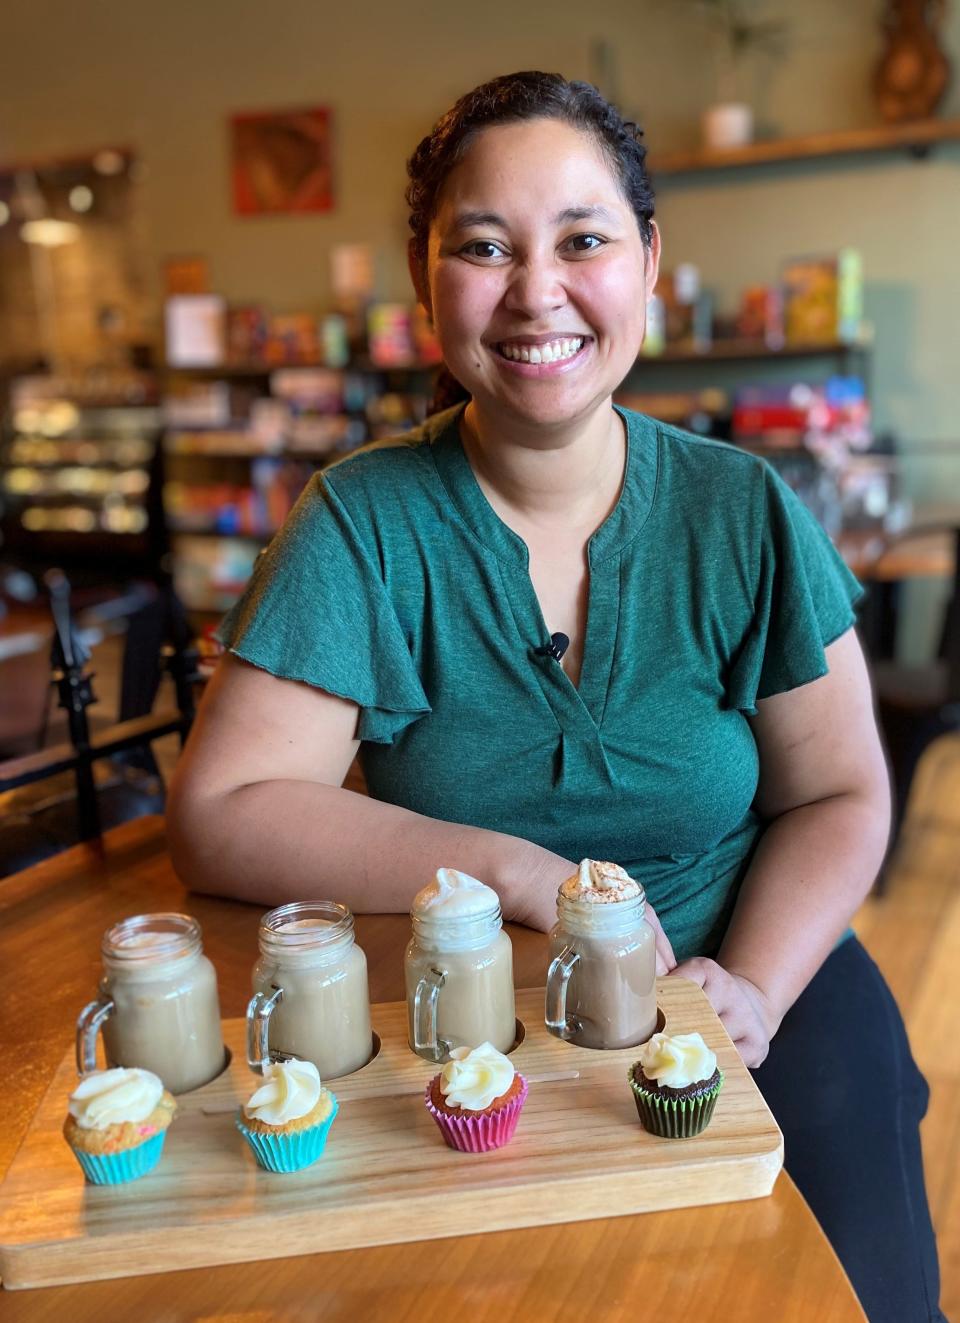 Bri Lutz made custom cakes and desserts to order out of her home before opening The Sweet Lair in Menasha.